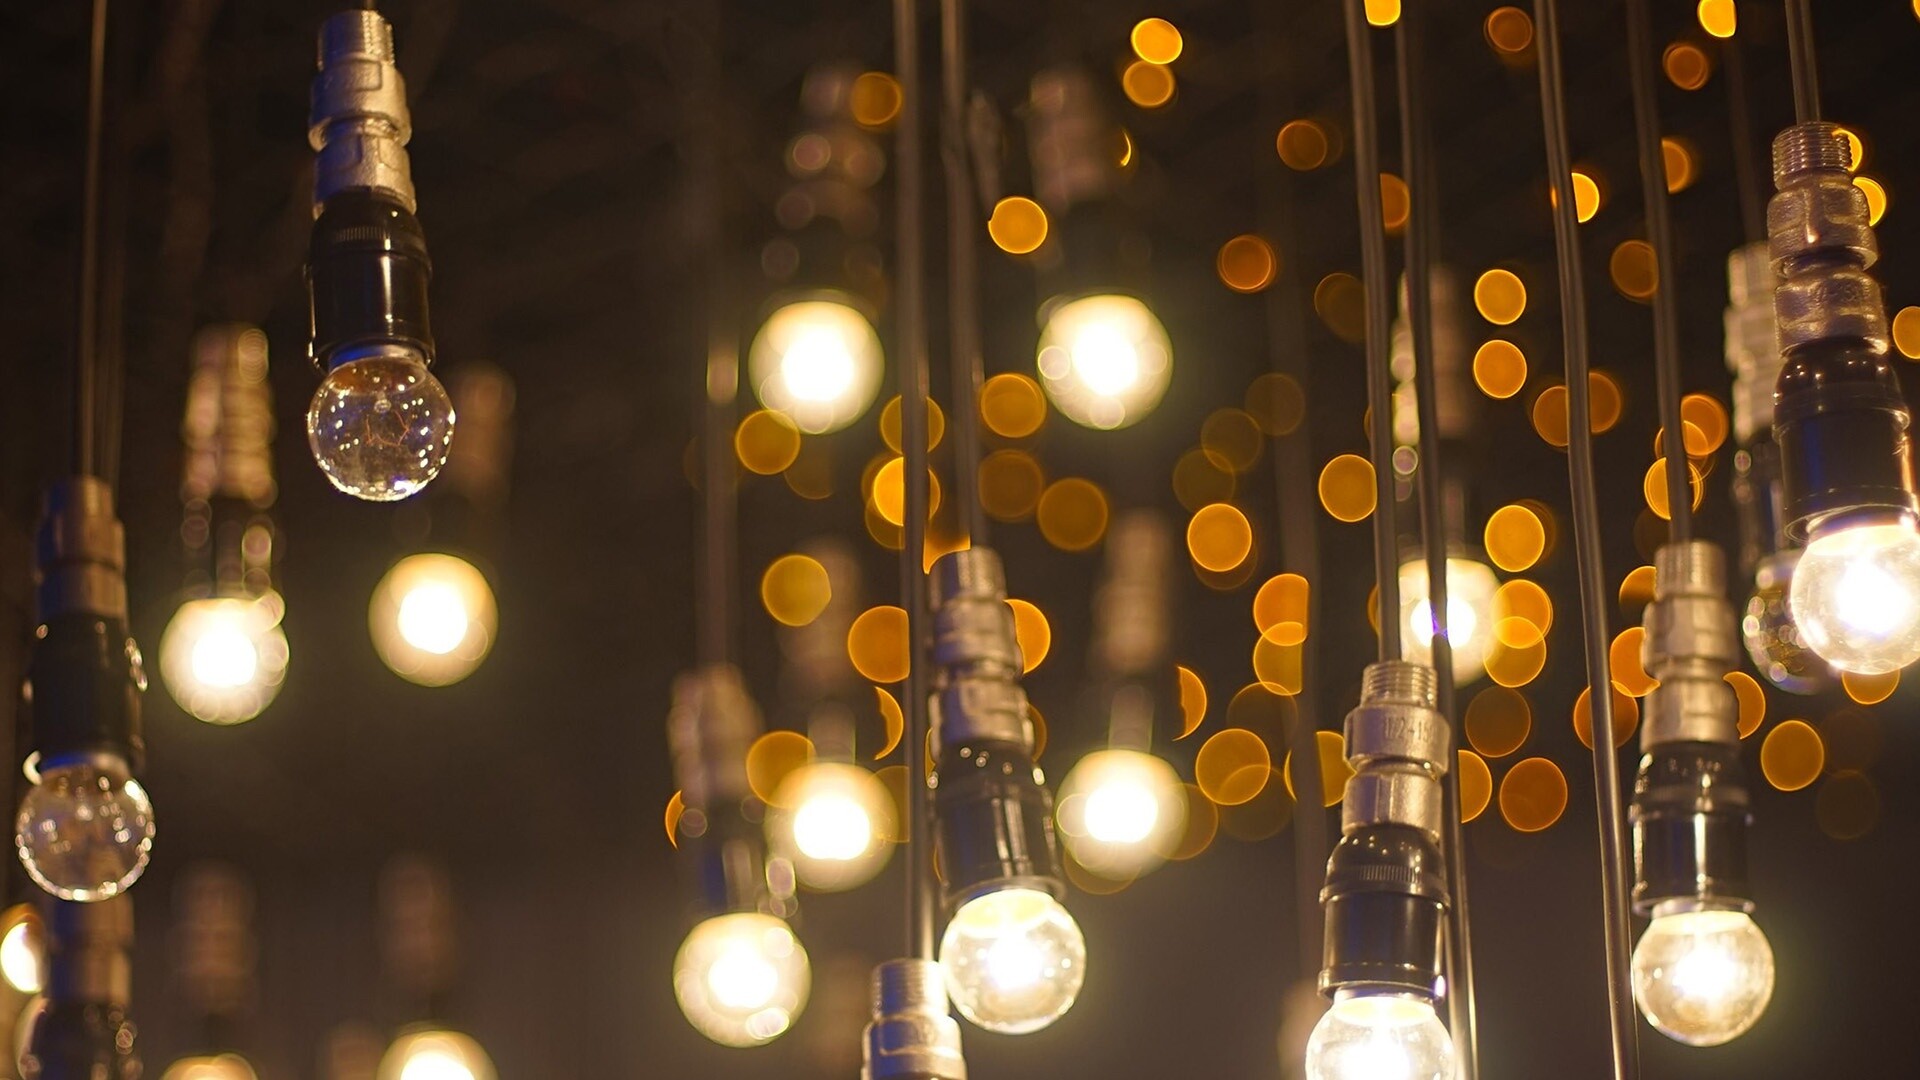 Gold Lights: Decorative vintage Edison bulbs with cord, The clear glass bulb, Retro styling, Out-of-focus blurred lights. 1920x1080 Full HD Wallpaper.